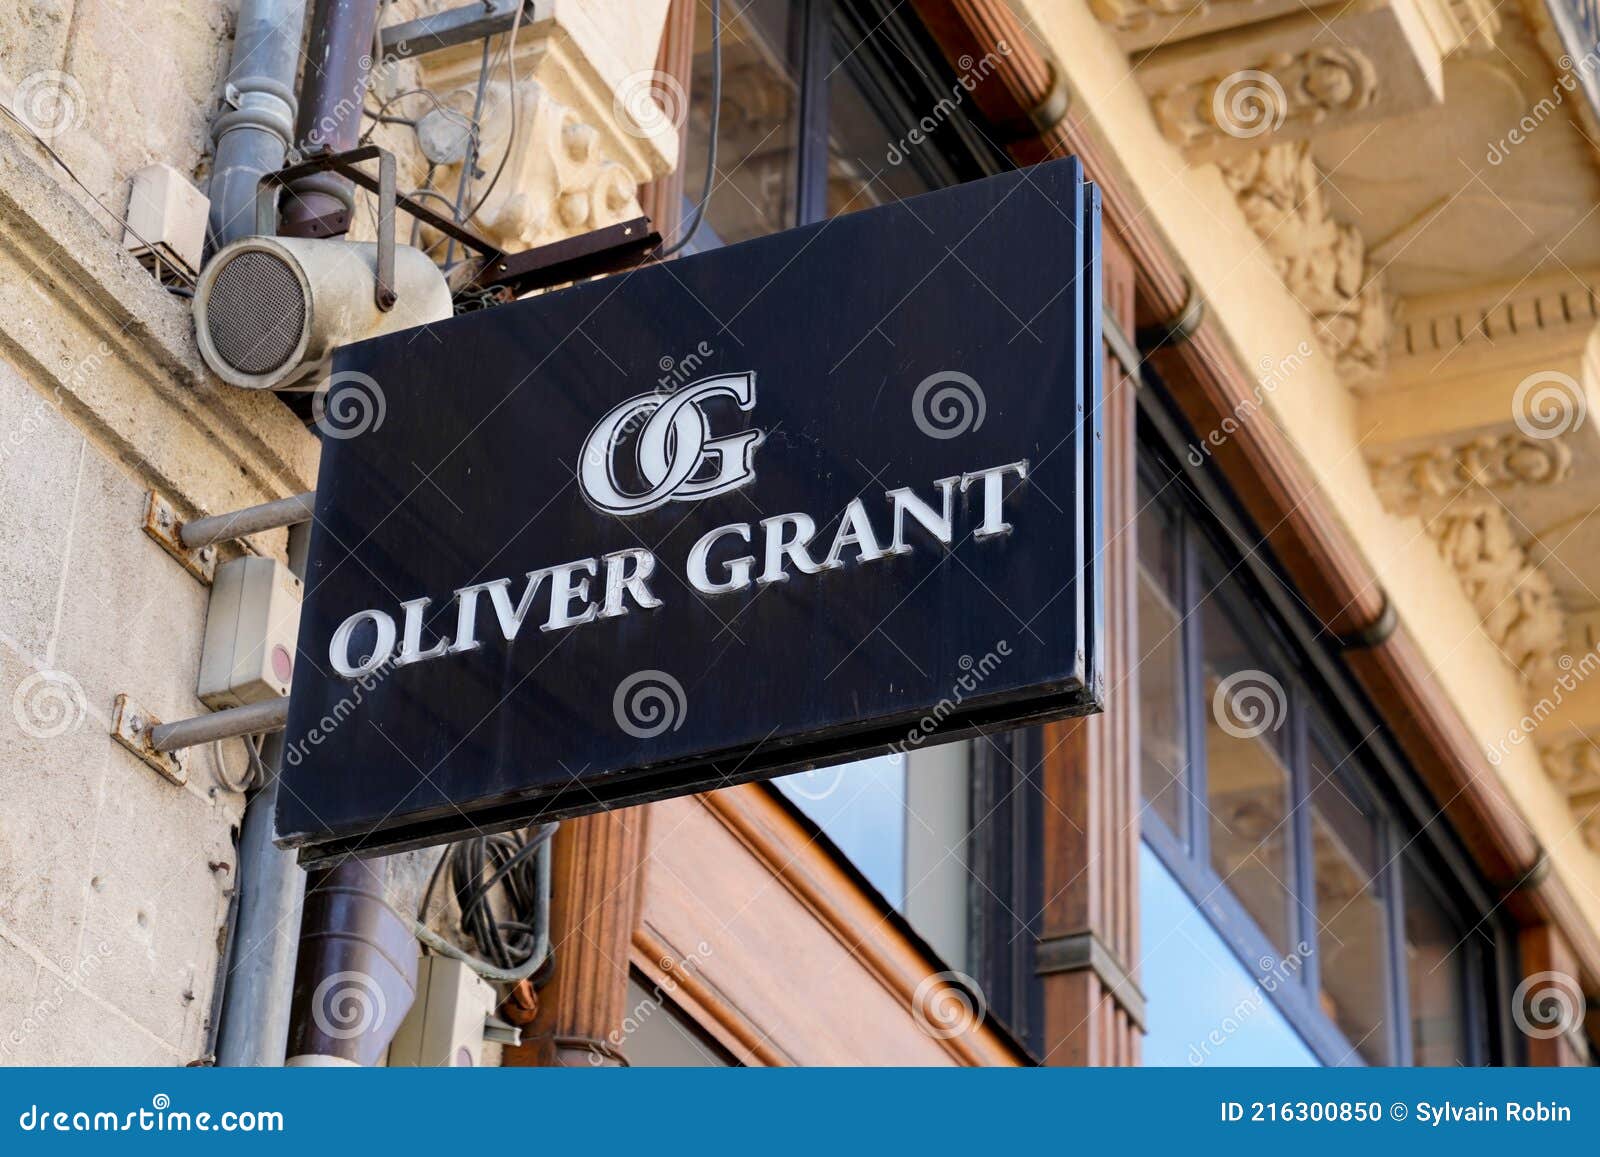 Oliver Grant Logo Sign and Brand Text of Store Luxury Shop in Street ...